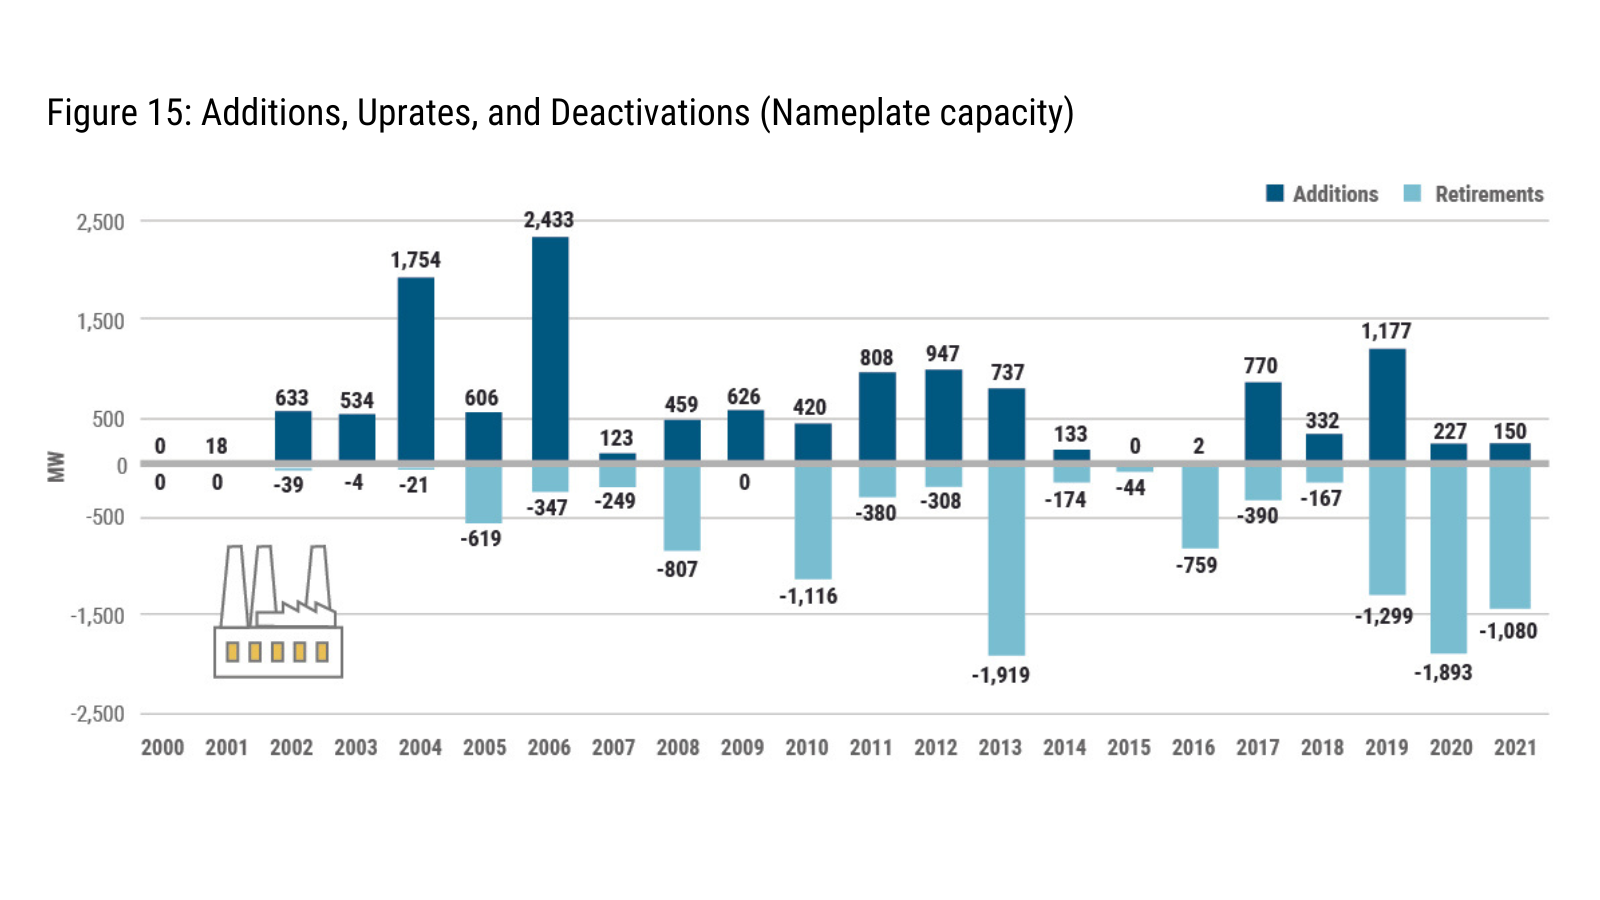 SOURCE: Power Trends 2022, Figure 15: Additions, Uprates, and Deactivations (Nameplate Capacity)